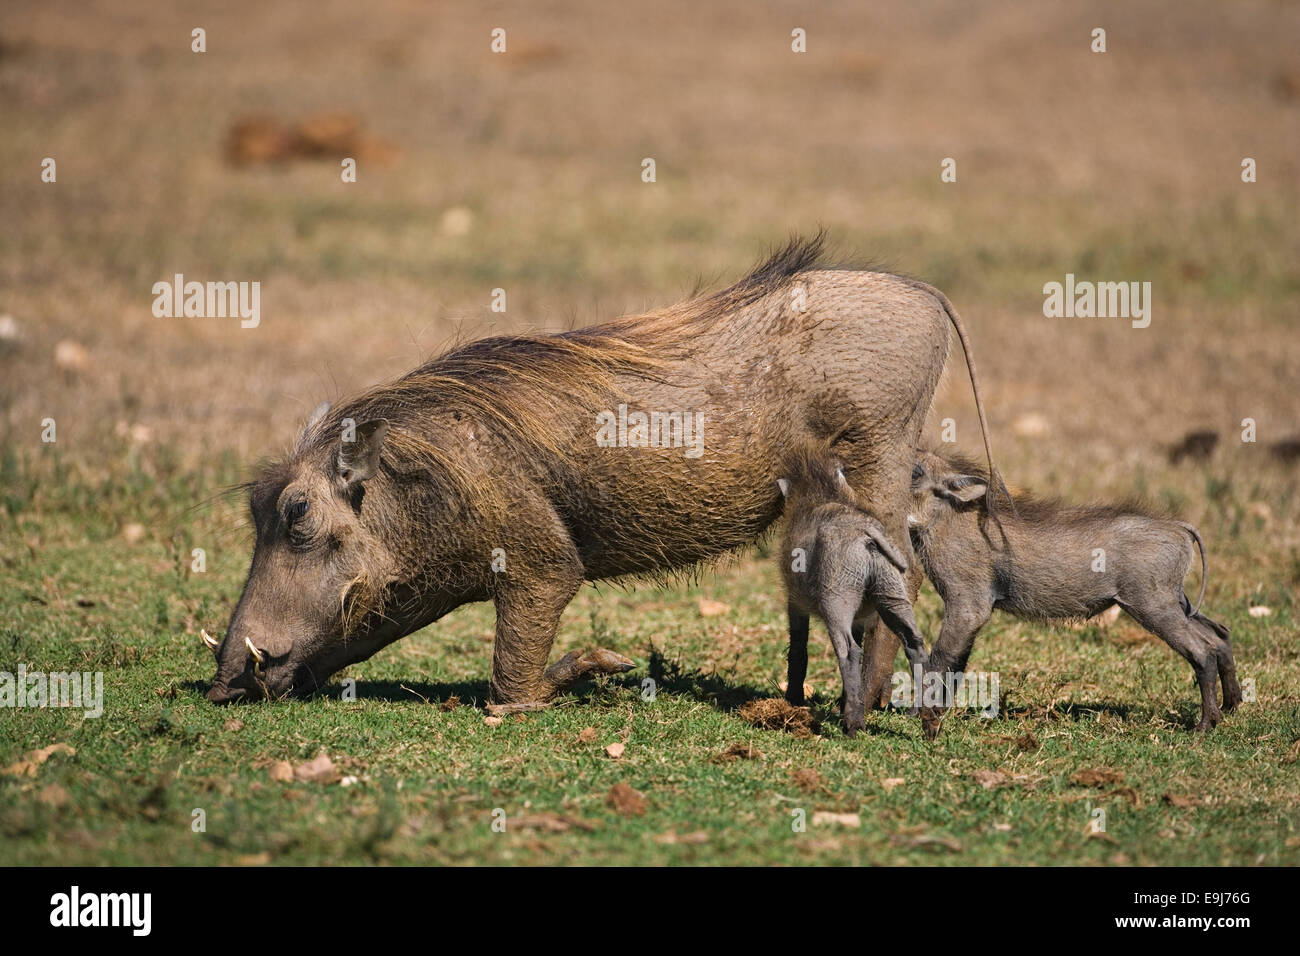 Warthog, Phacochoerus aethiopicus, suckling young, Addo national park, South Africa Stock Photo